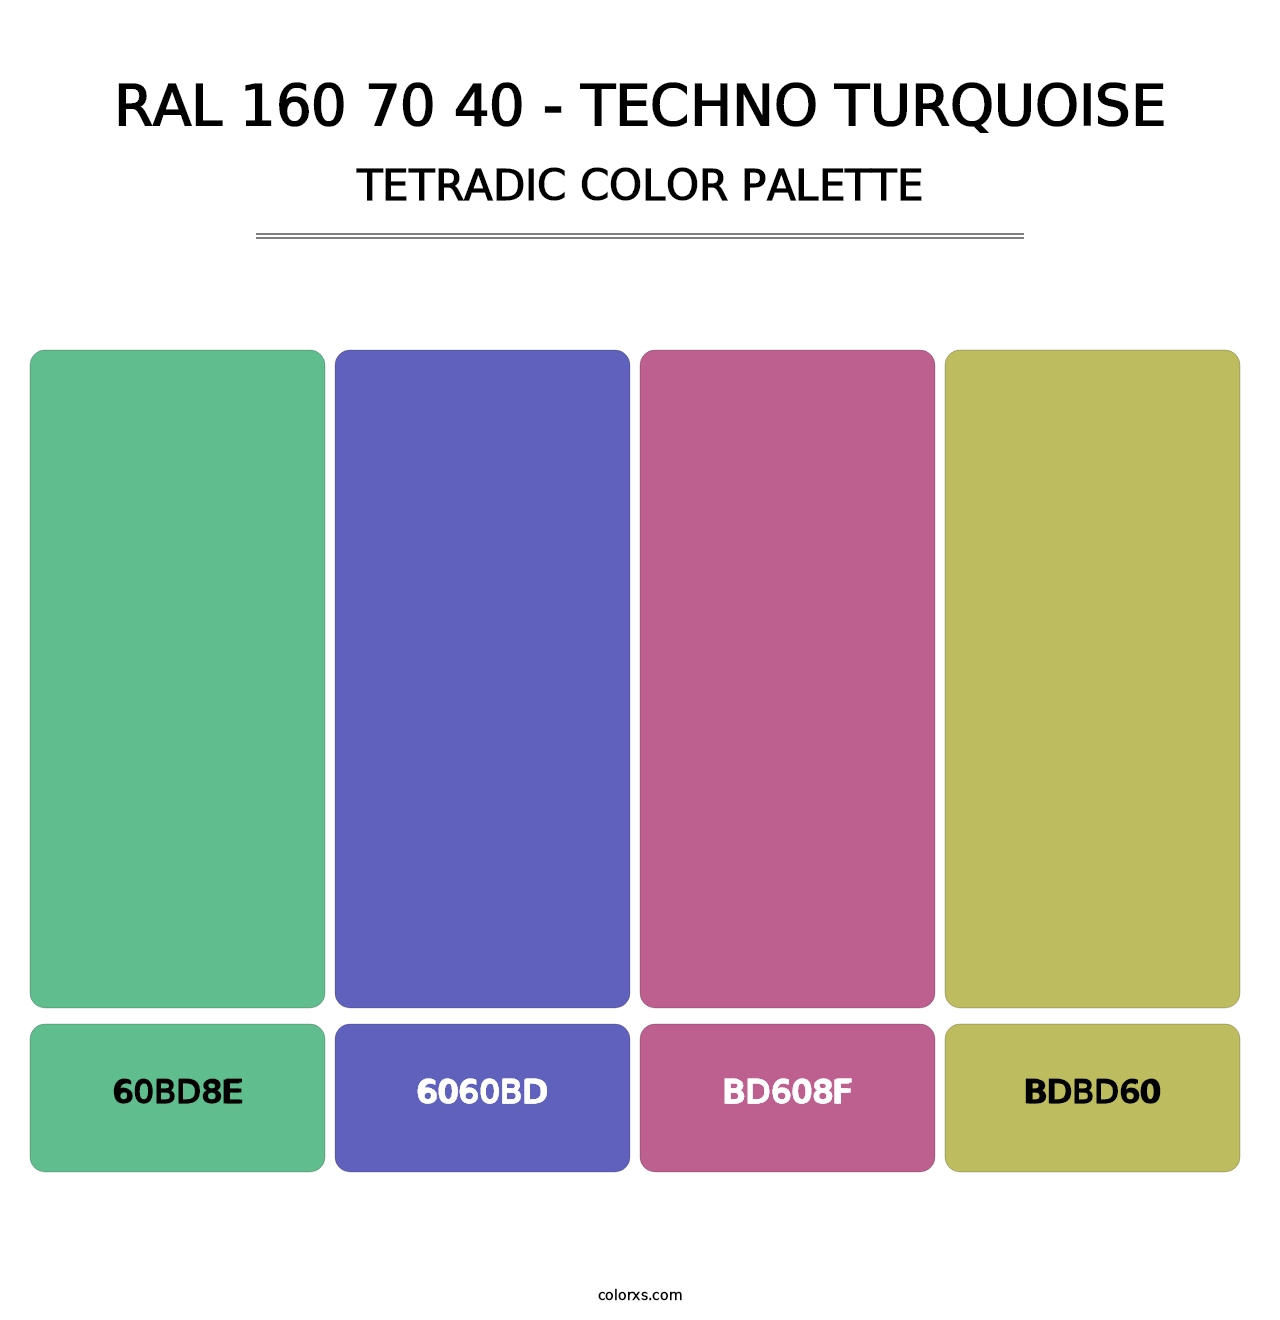 RAL 160 70 40 - Techno Turquoise - Tetradic Color Palette